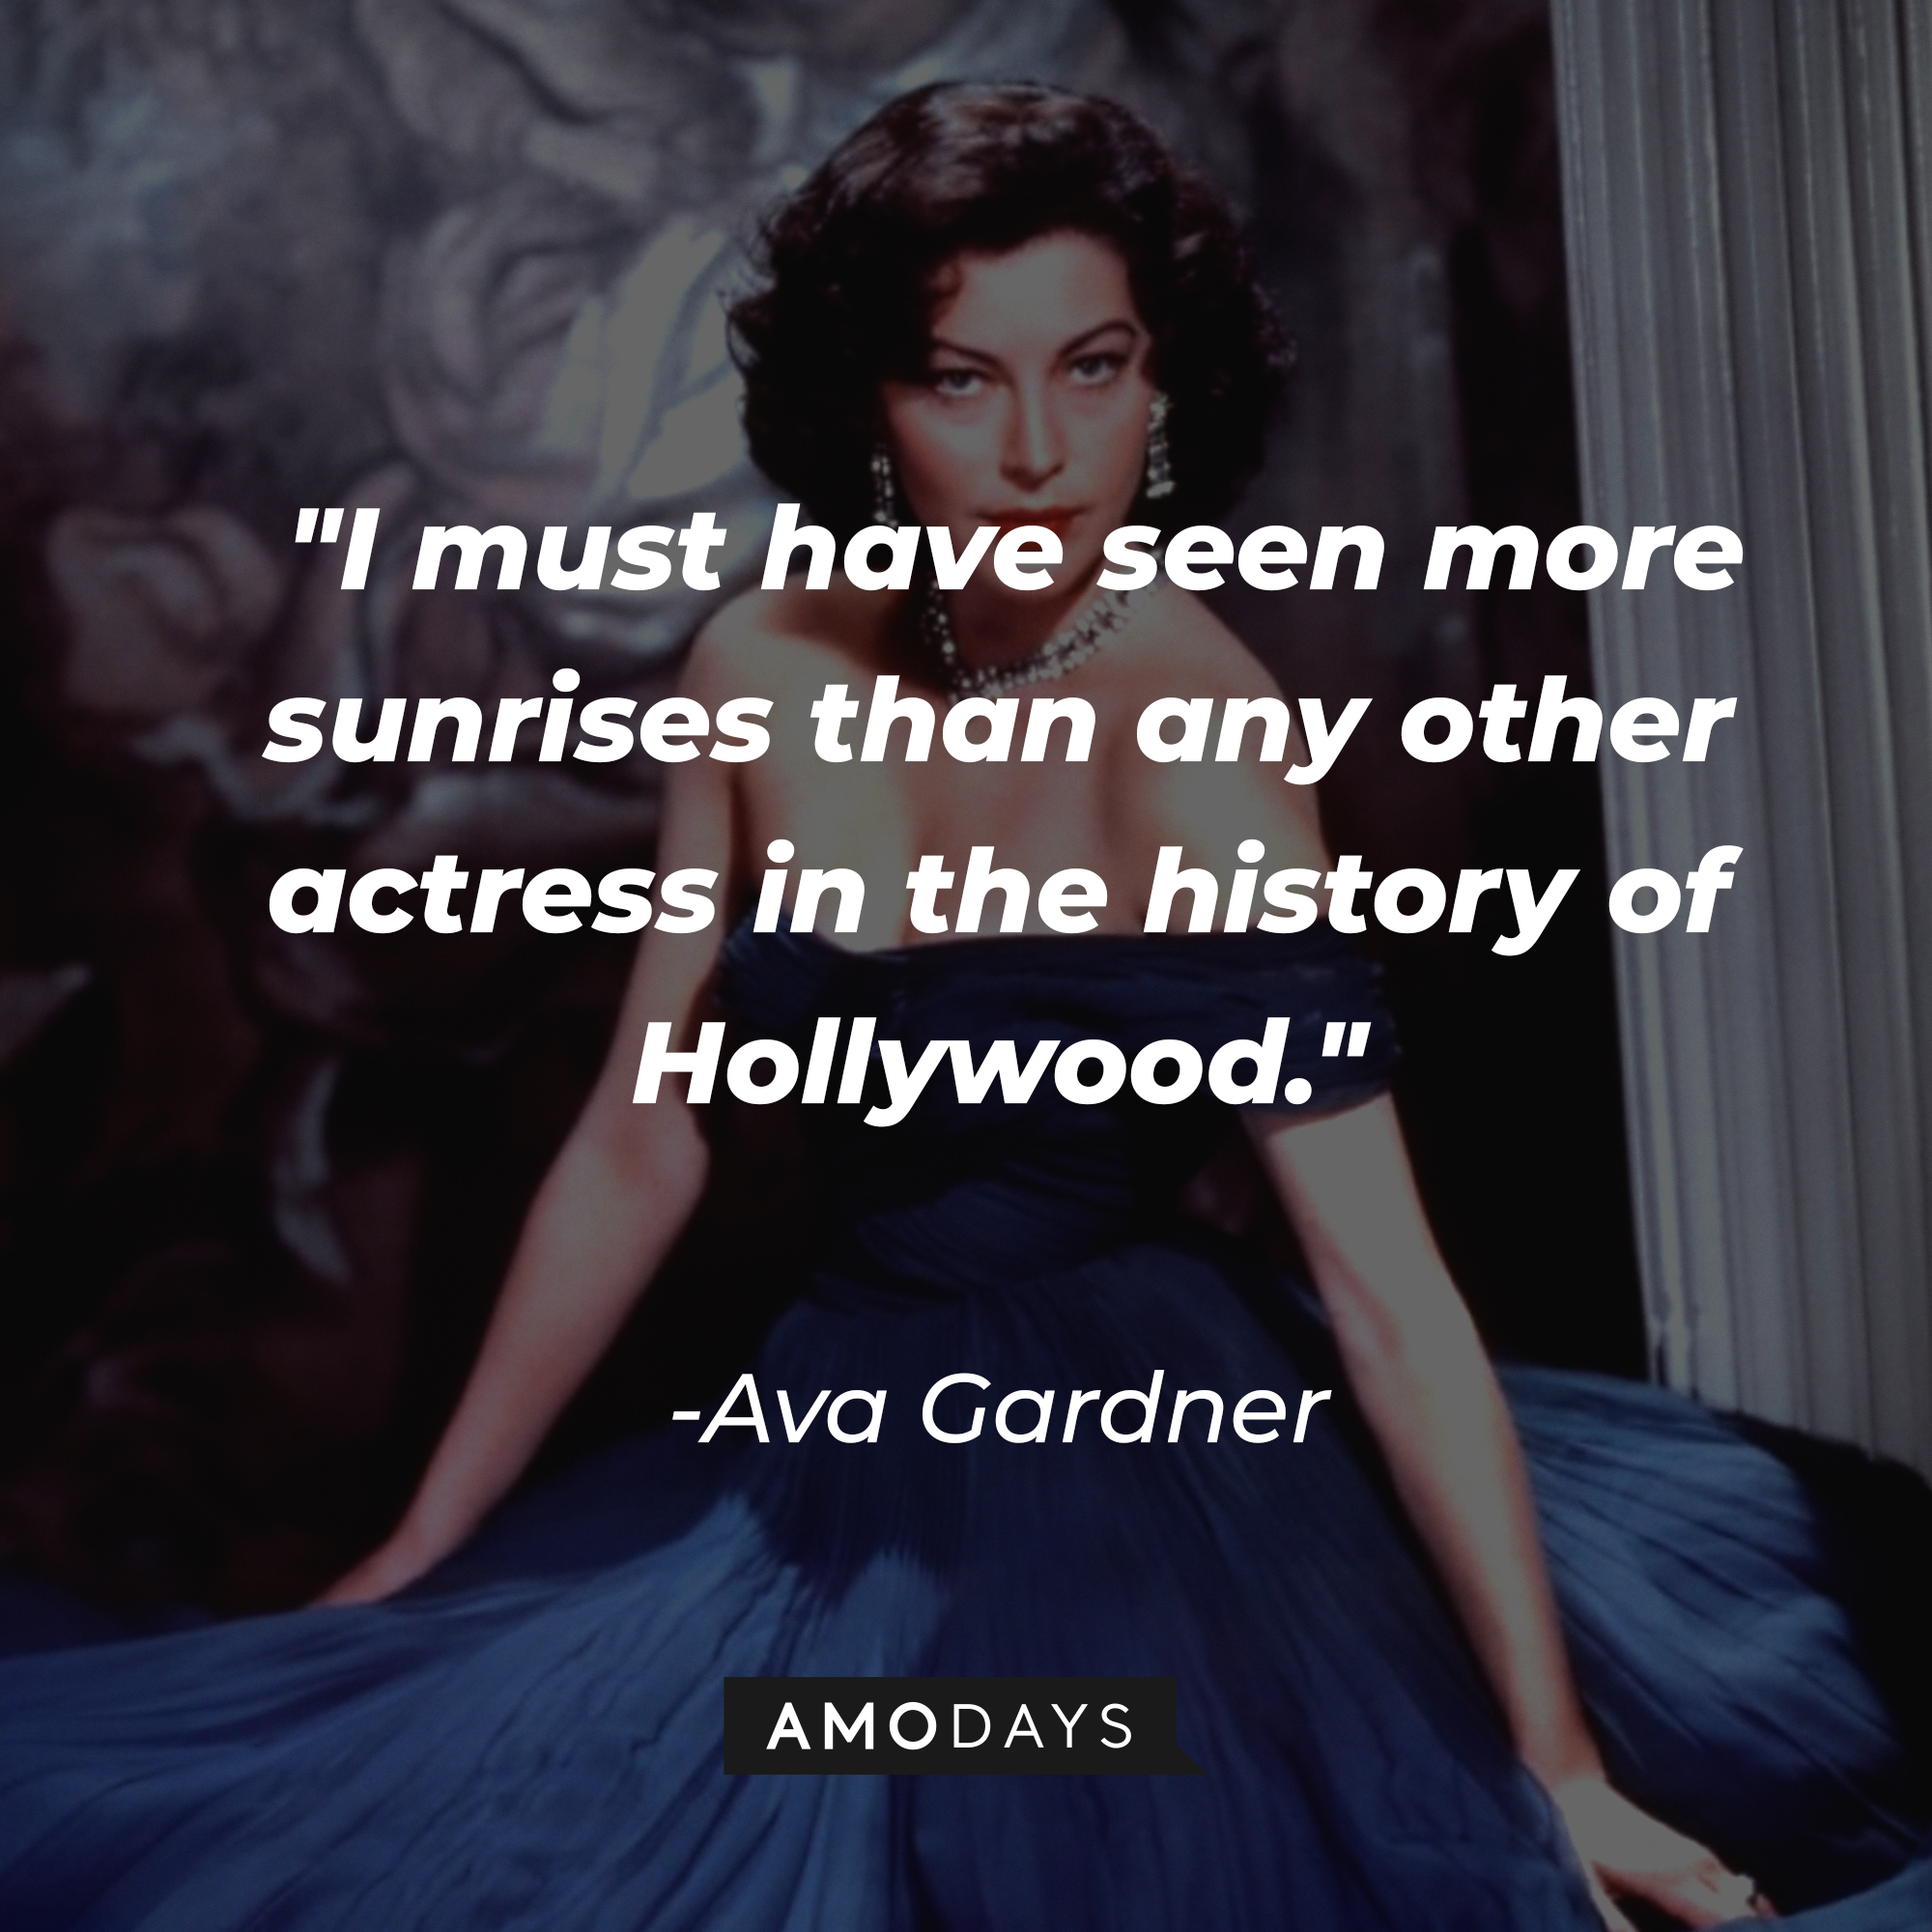 Ava Gardner with her quote: "I must have seen more sunrises than any other actress in the history of Hollywood." | Source: Getty Images